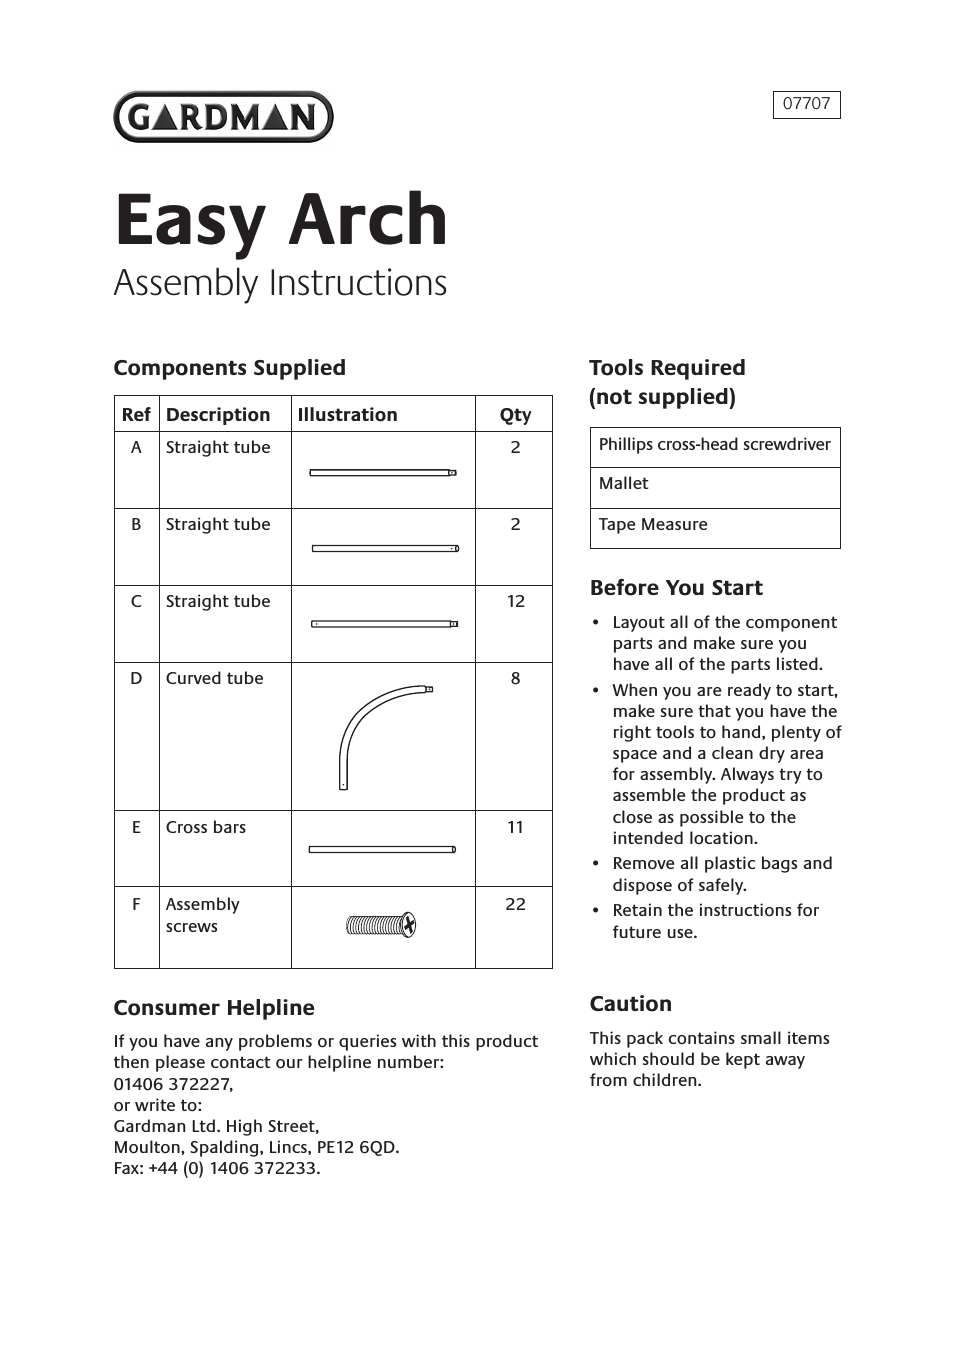 Easy Arch